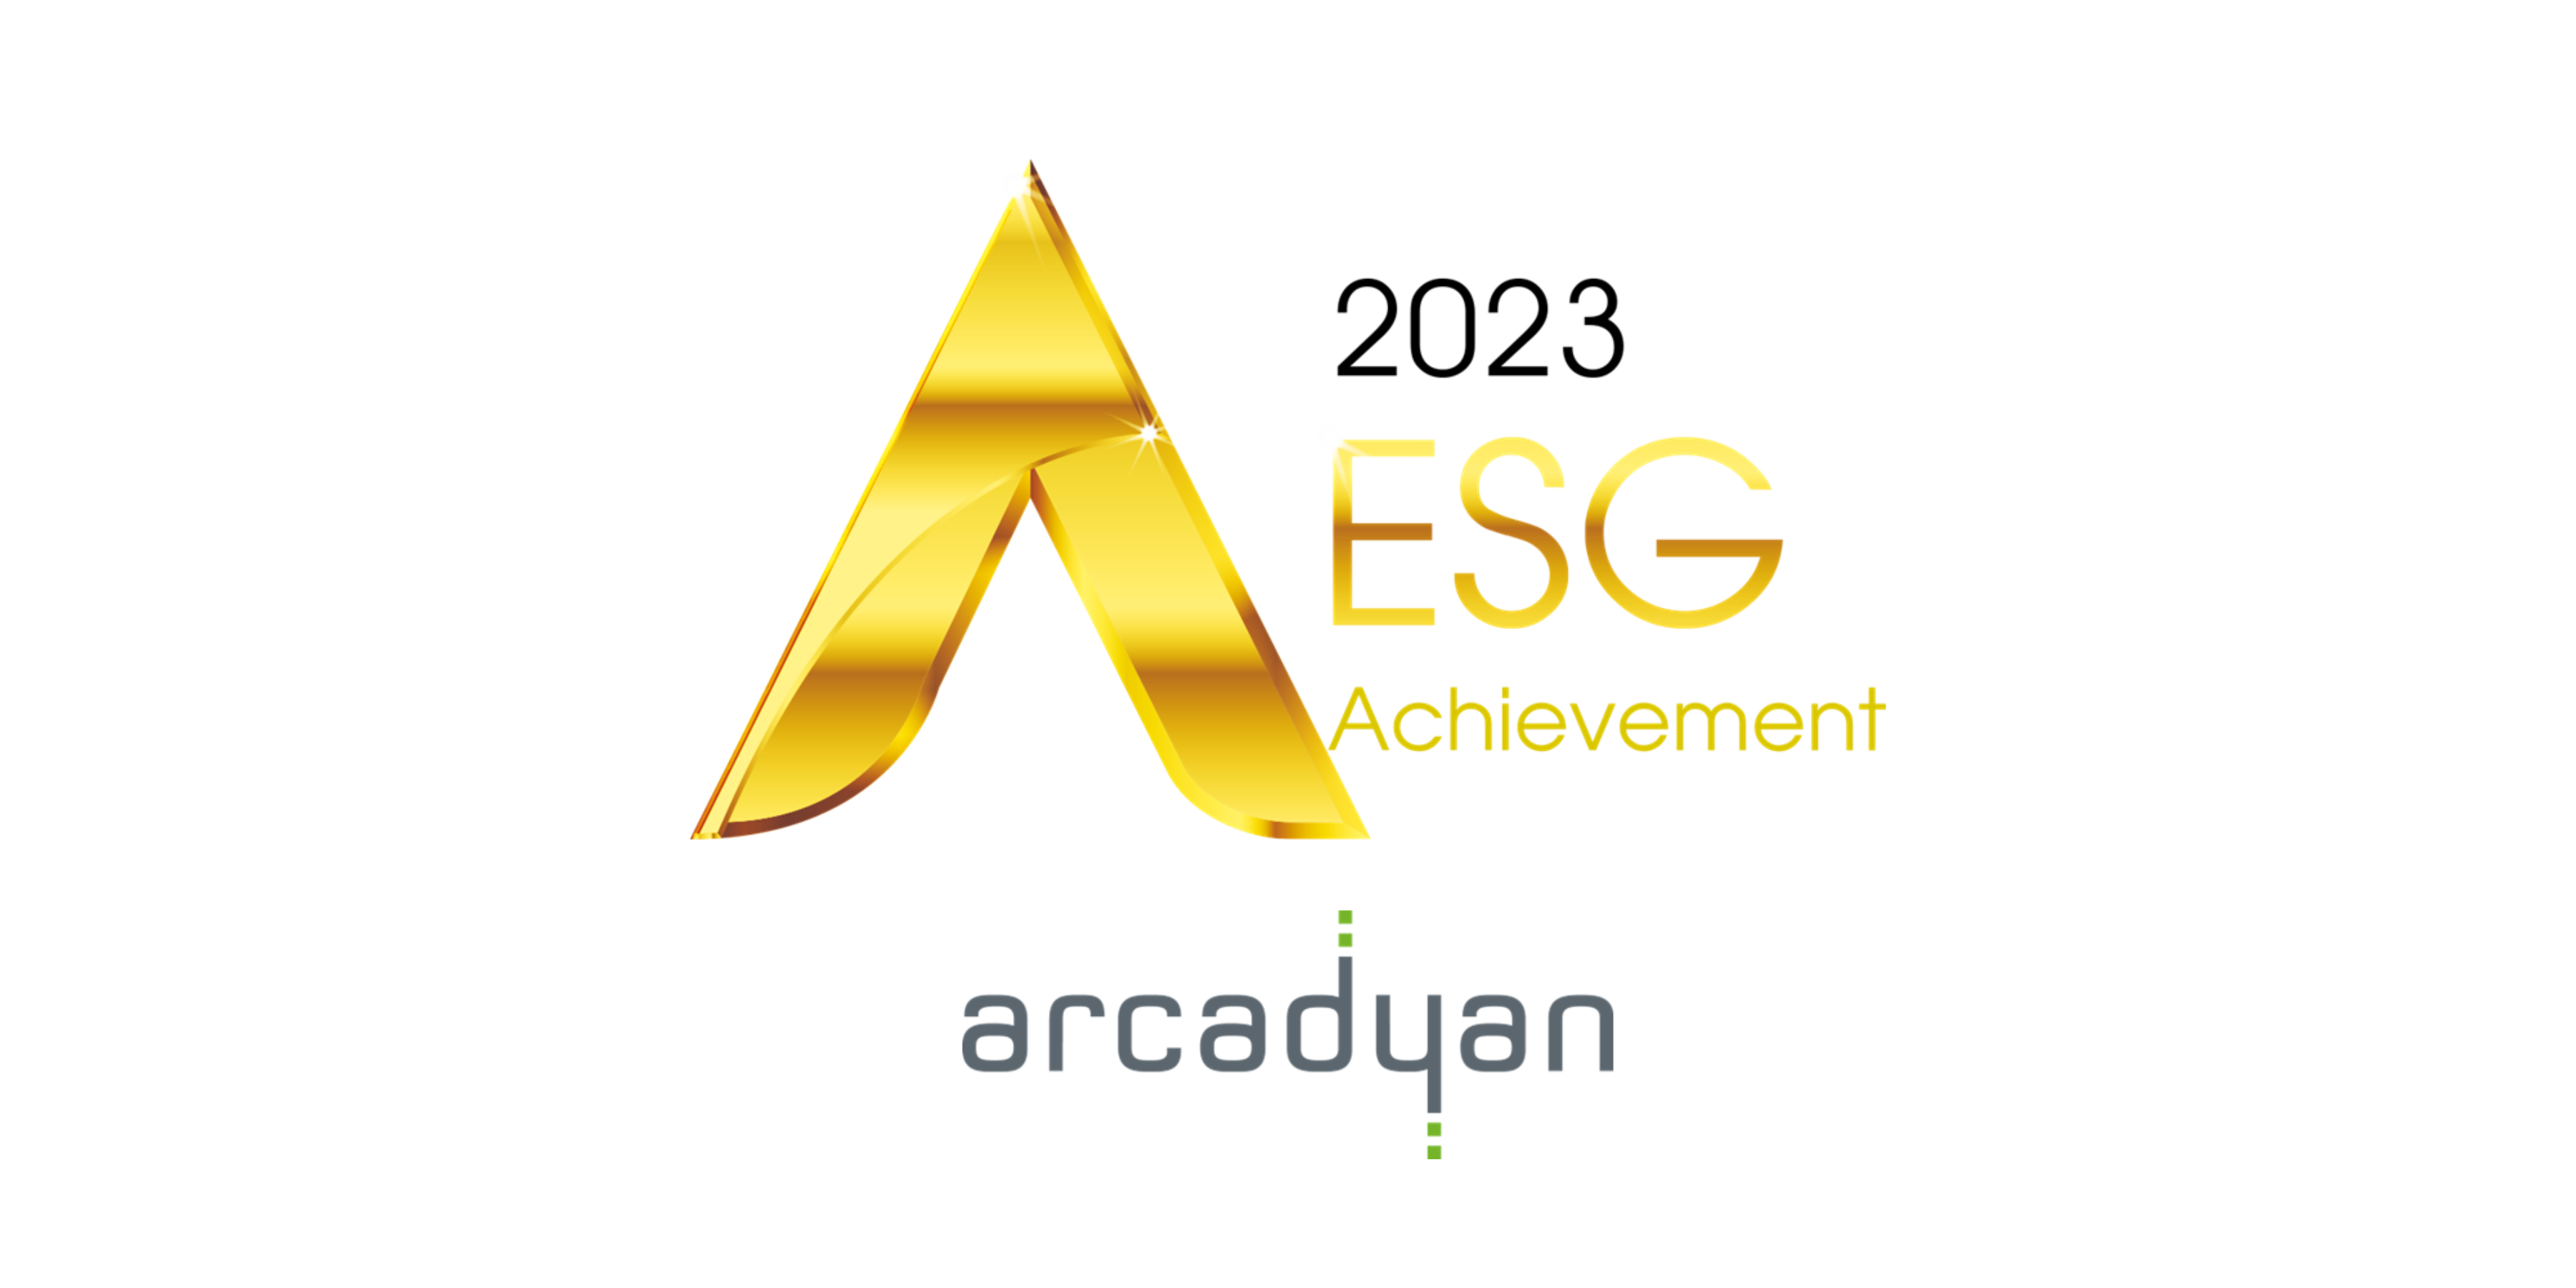 Arcadyan received Golden ESG Achievement in 2023 E-Mobility Taiwan.